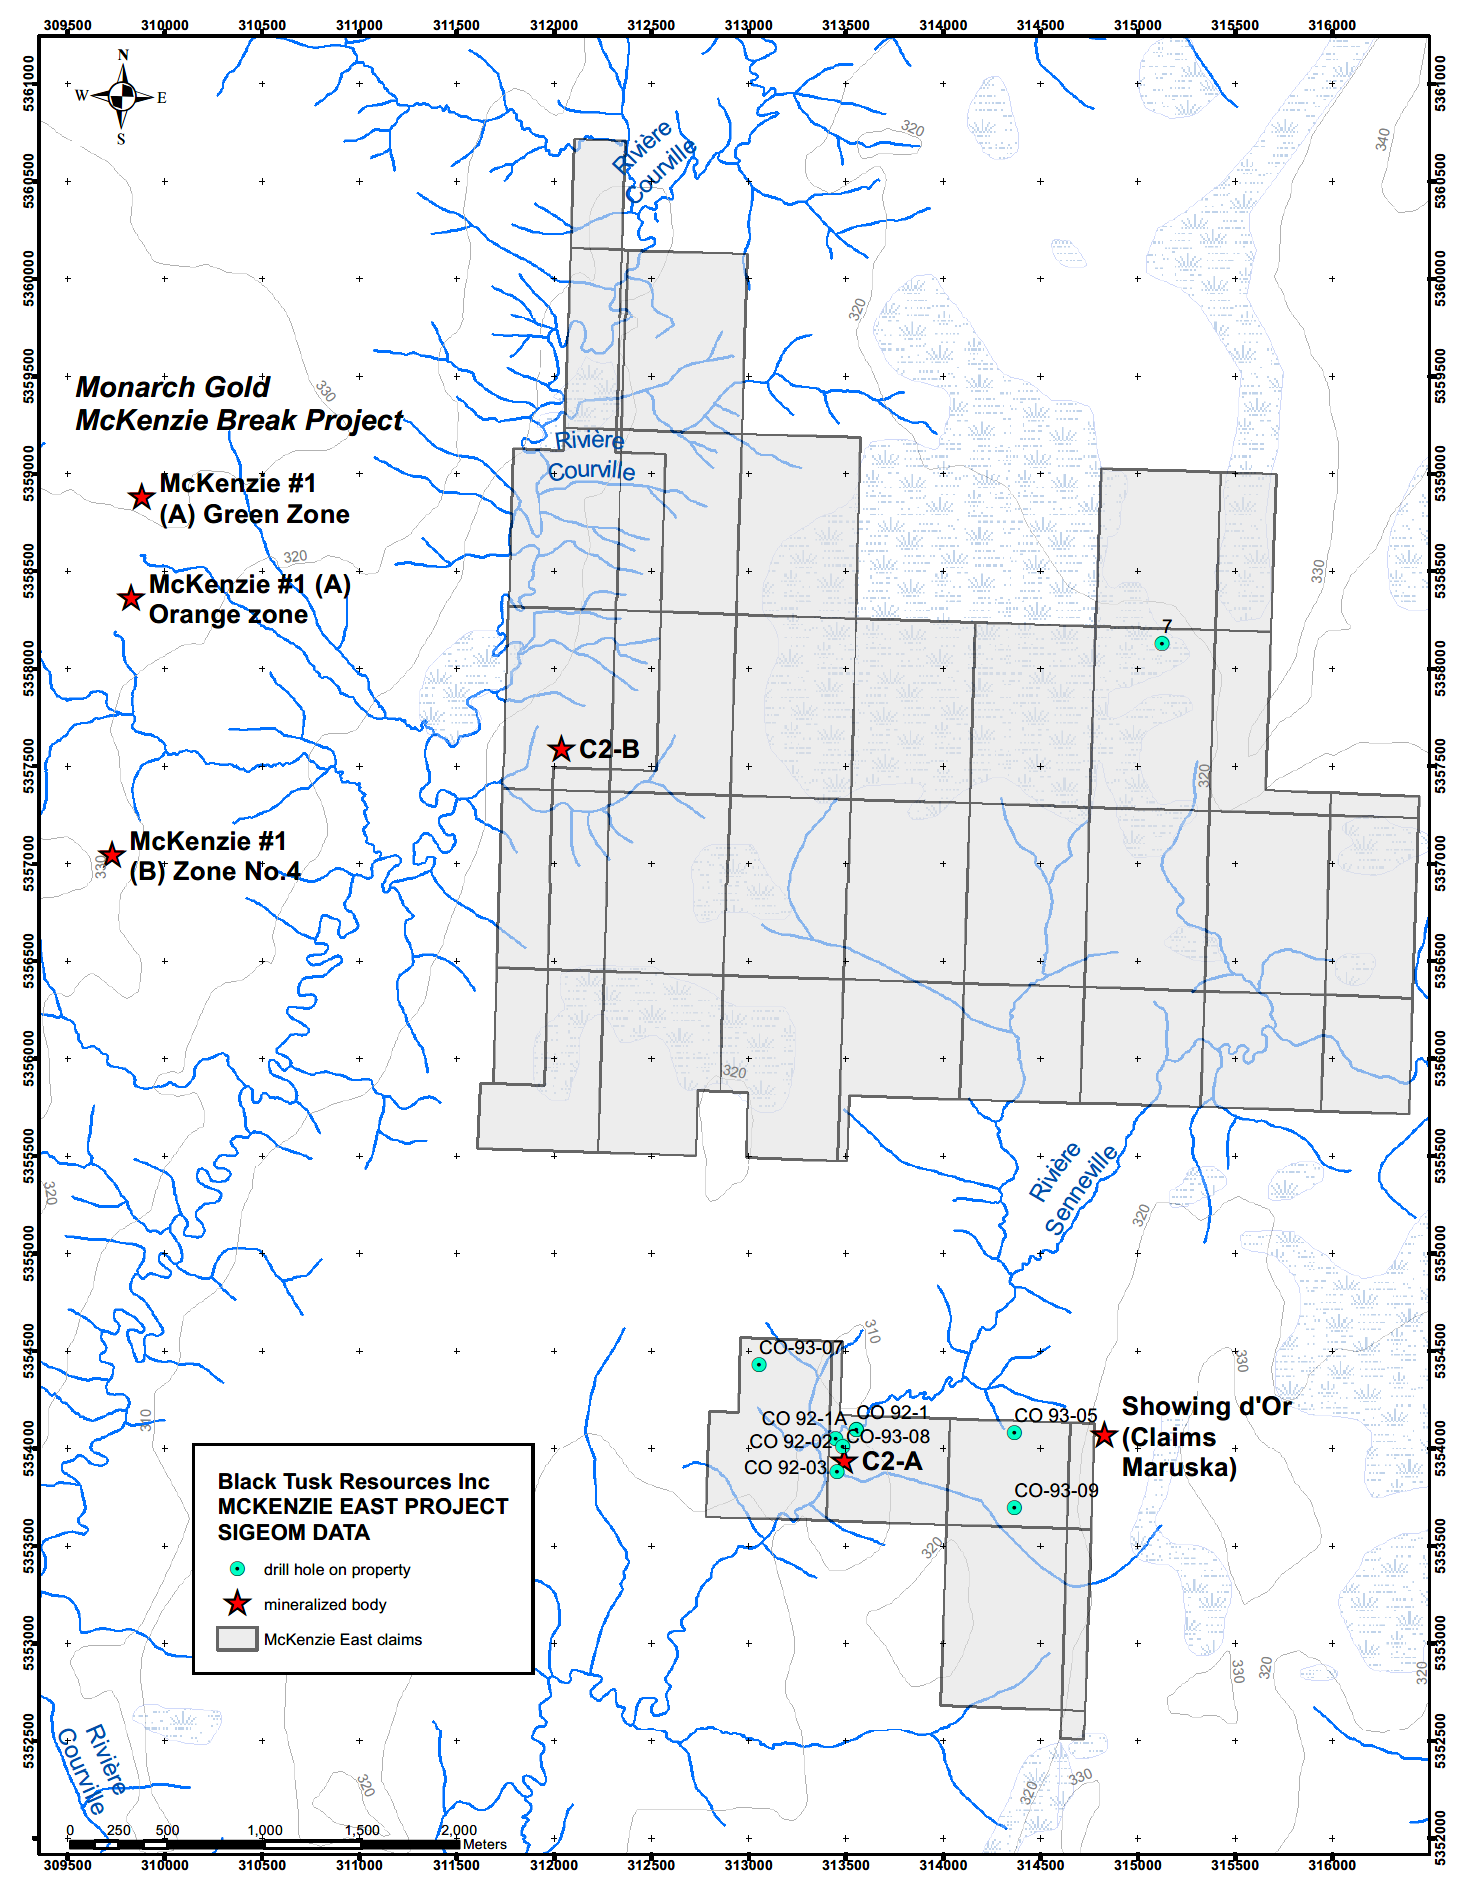 Black Tusk Resources Inc, Monday, March 2, 2020, Press release picture